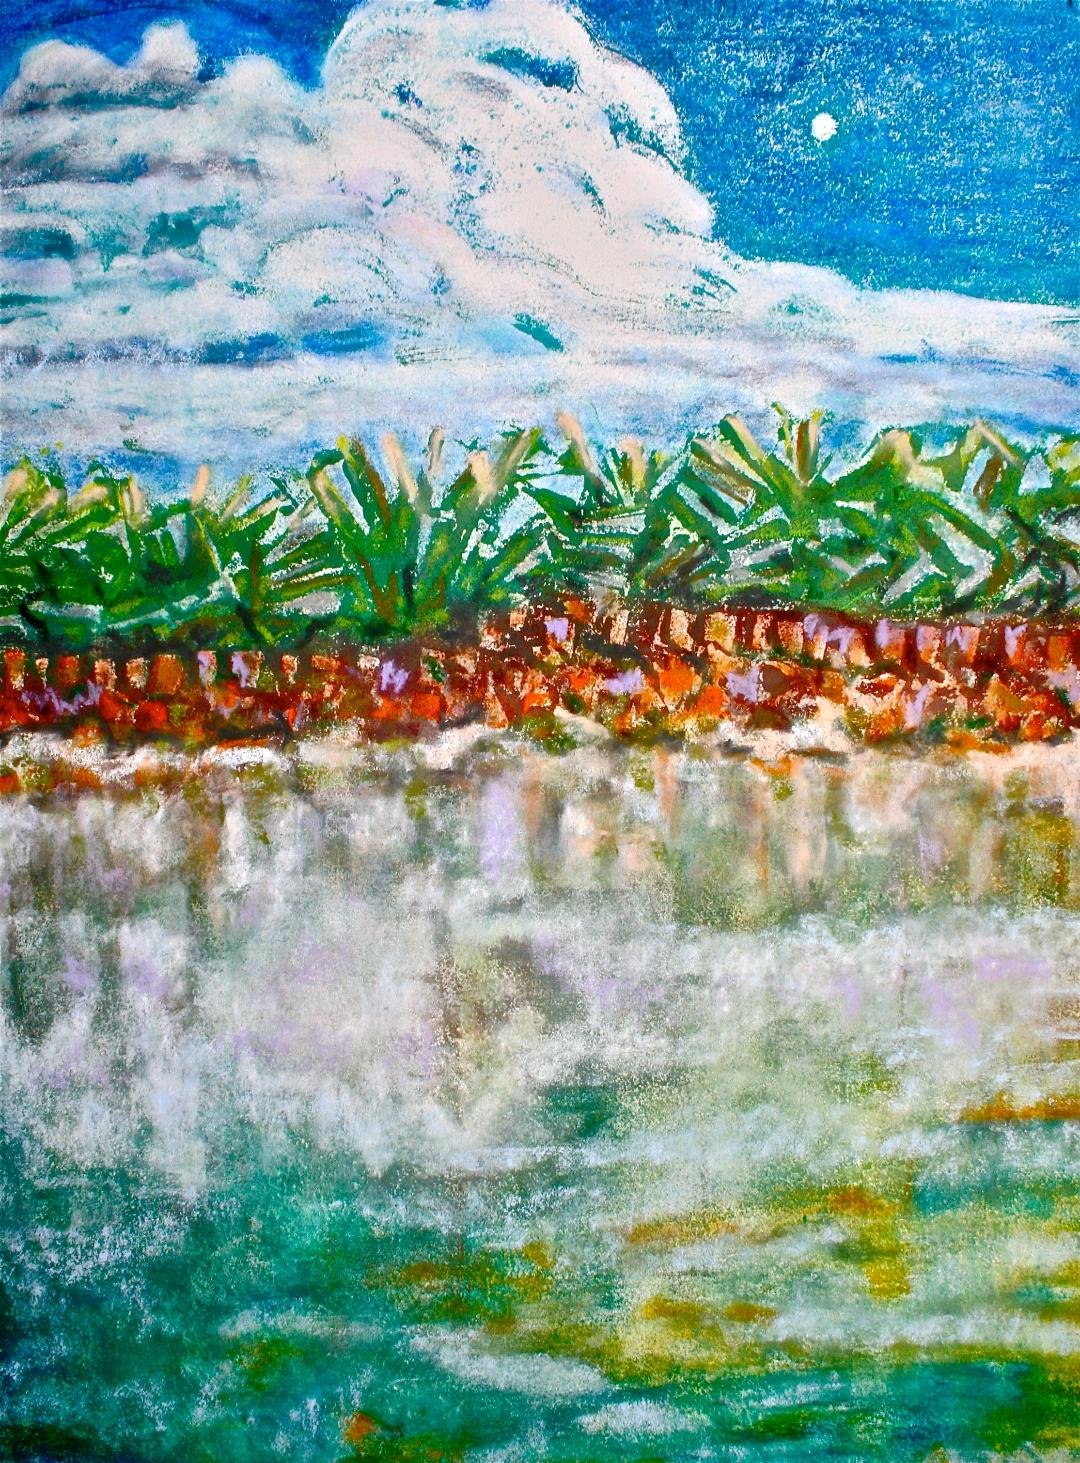 "Everglades Waterline I" by Susana Youngsteadt